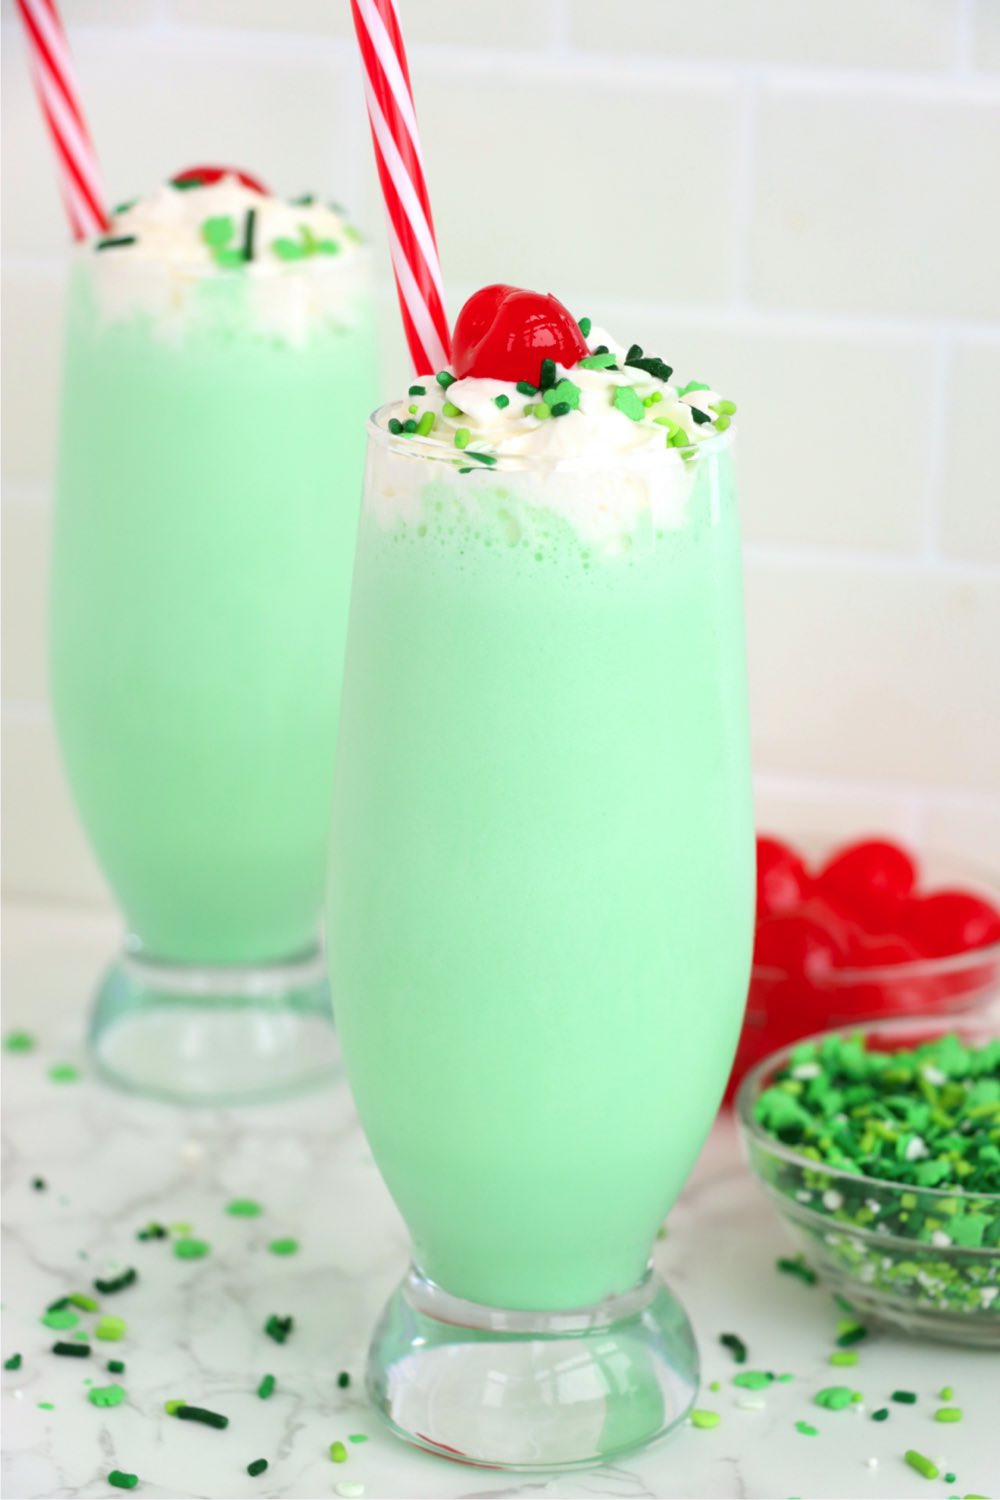 Two homemade Shamrock Shakes topped with cherries